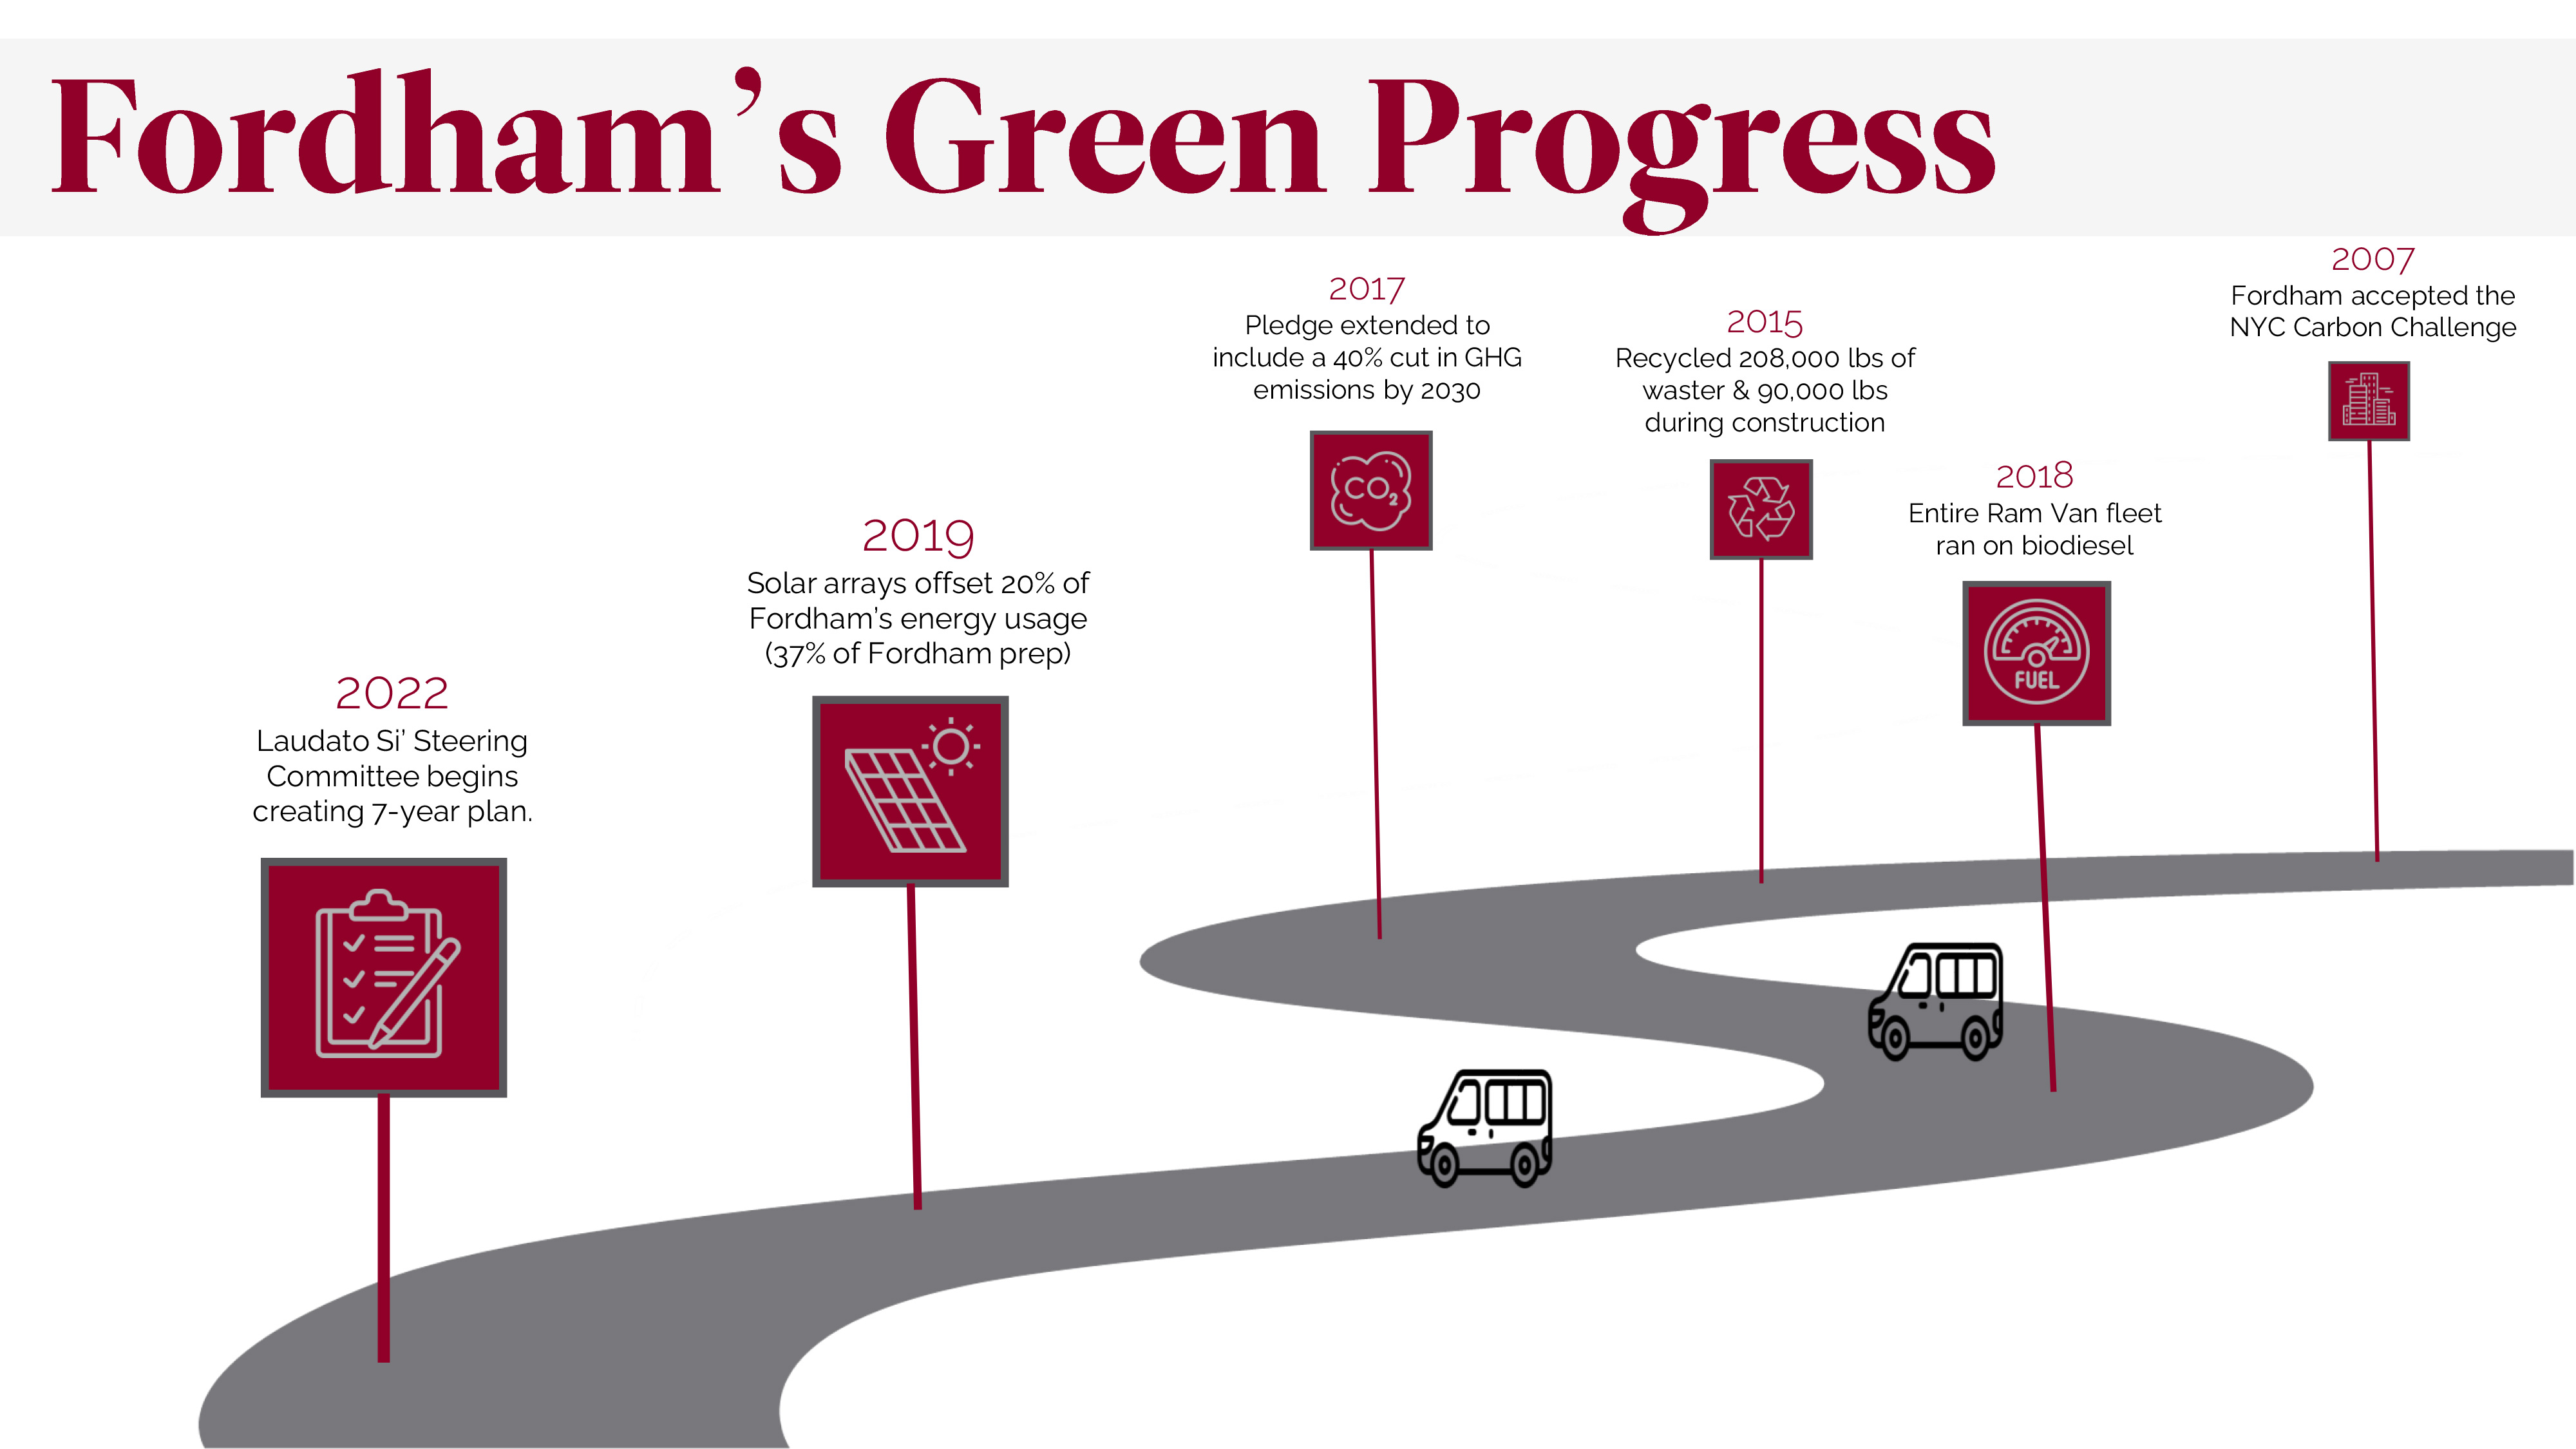 An infographic showing Fordham's Green Progress from 2007 to 2022